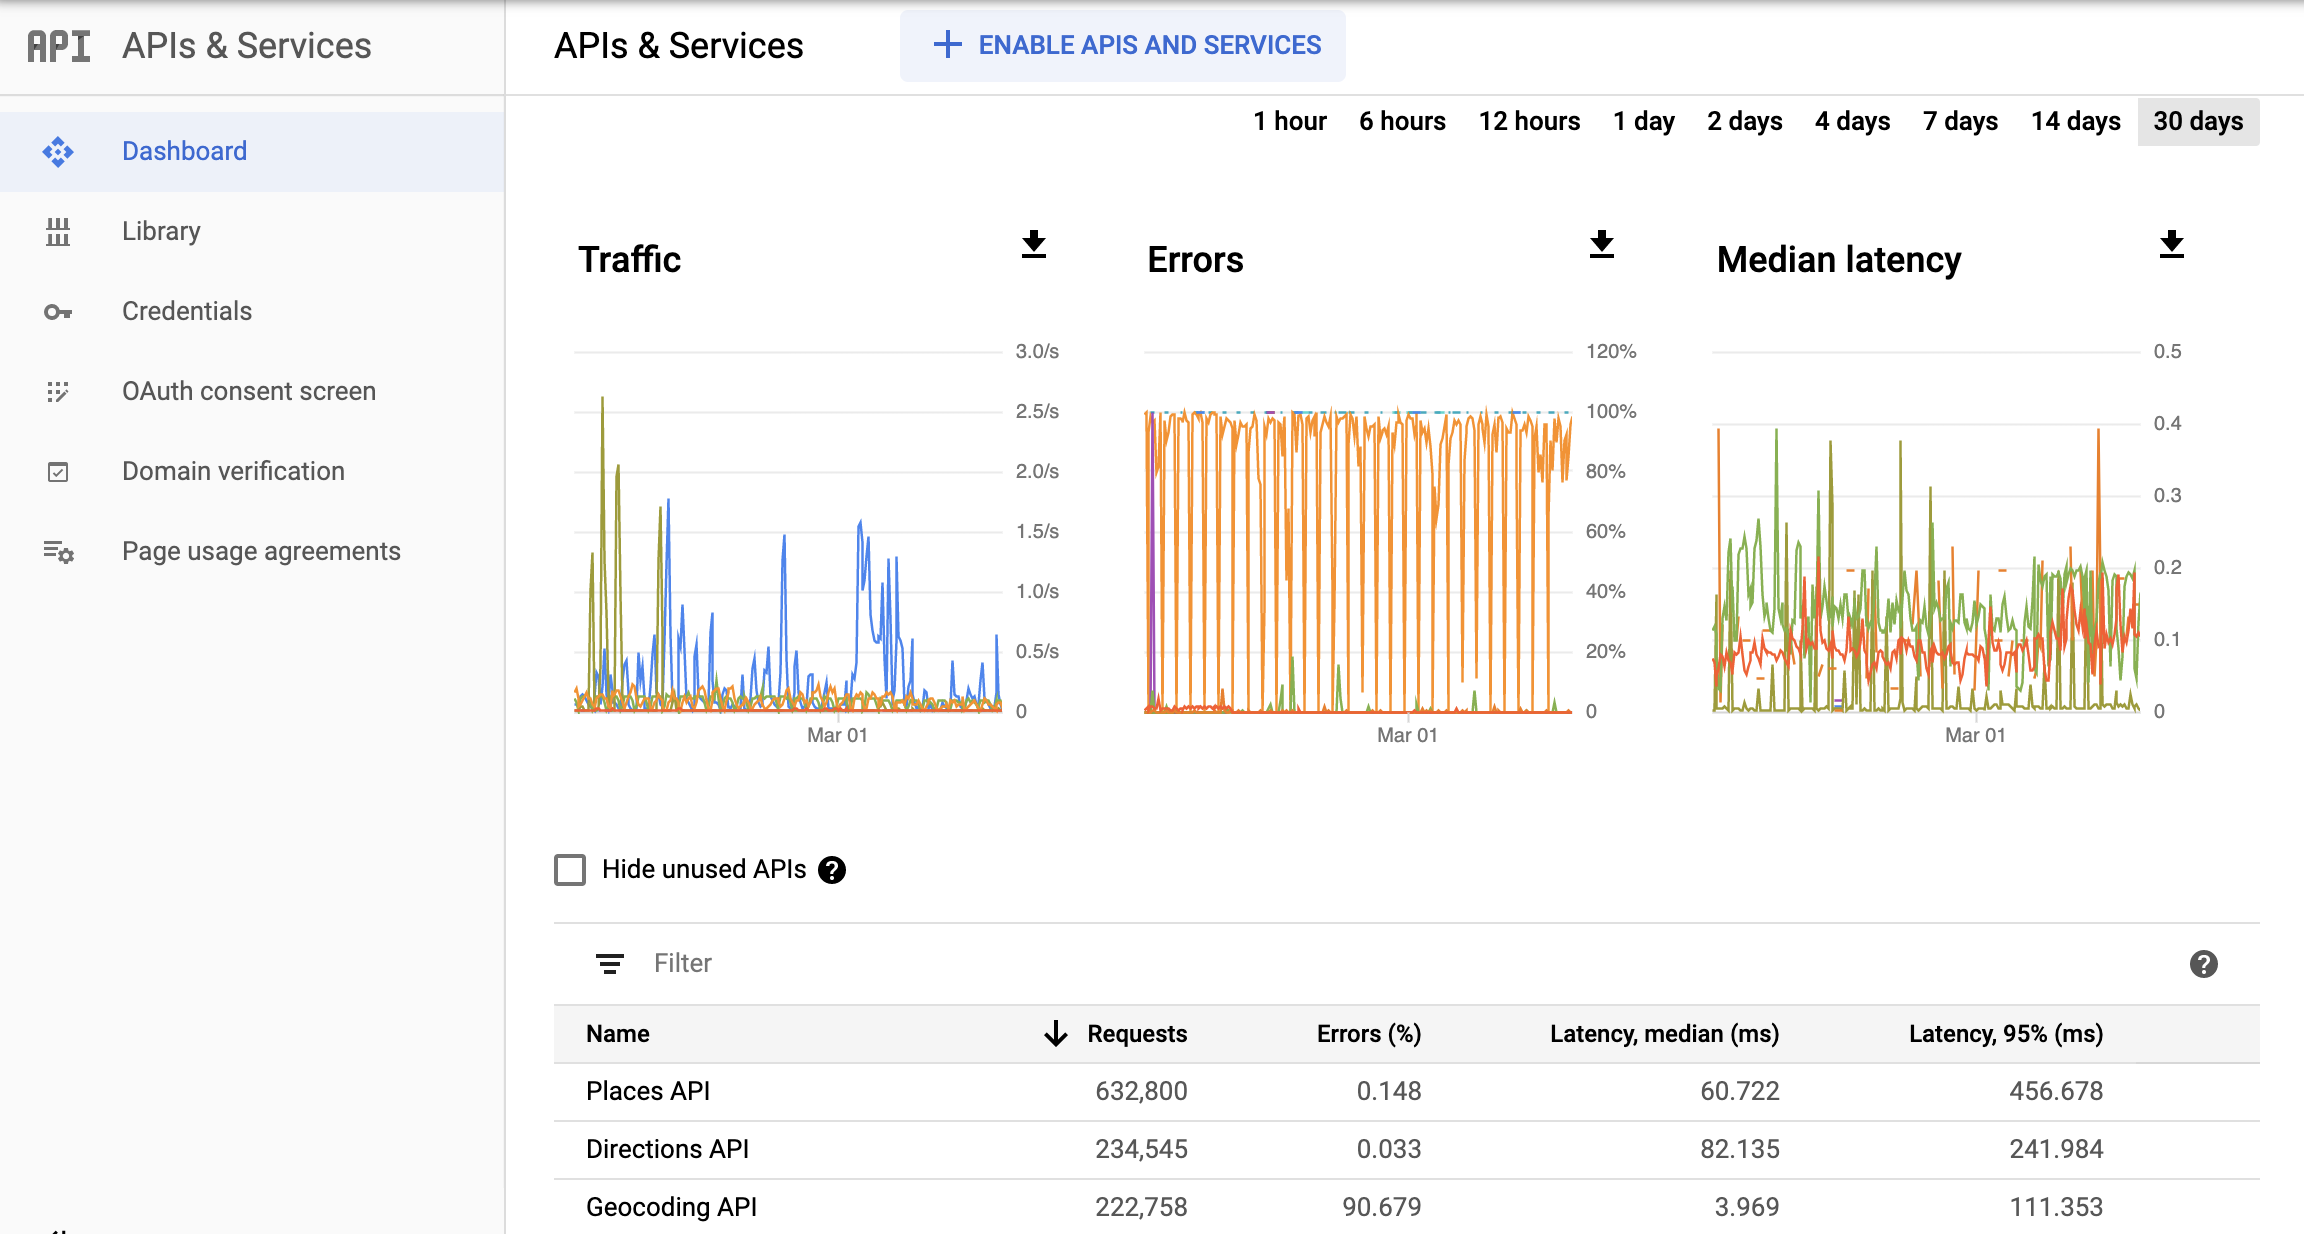 A screenshot of the Monitoring APIs page in the Google Cloud Console, displaying the APIs & Services
  report dashboard. It shows separate charts for Traffic, Errors, and Median Latency. These charts
  can show data for one hour up through 30 days.